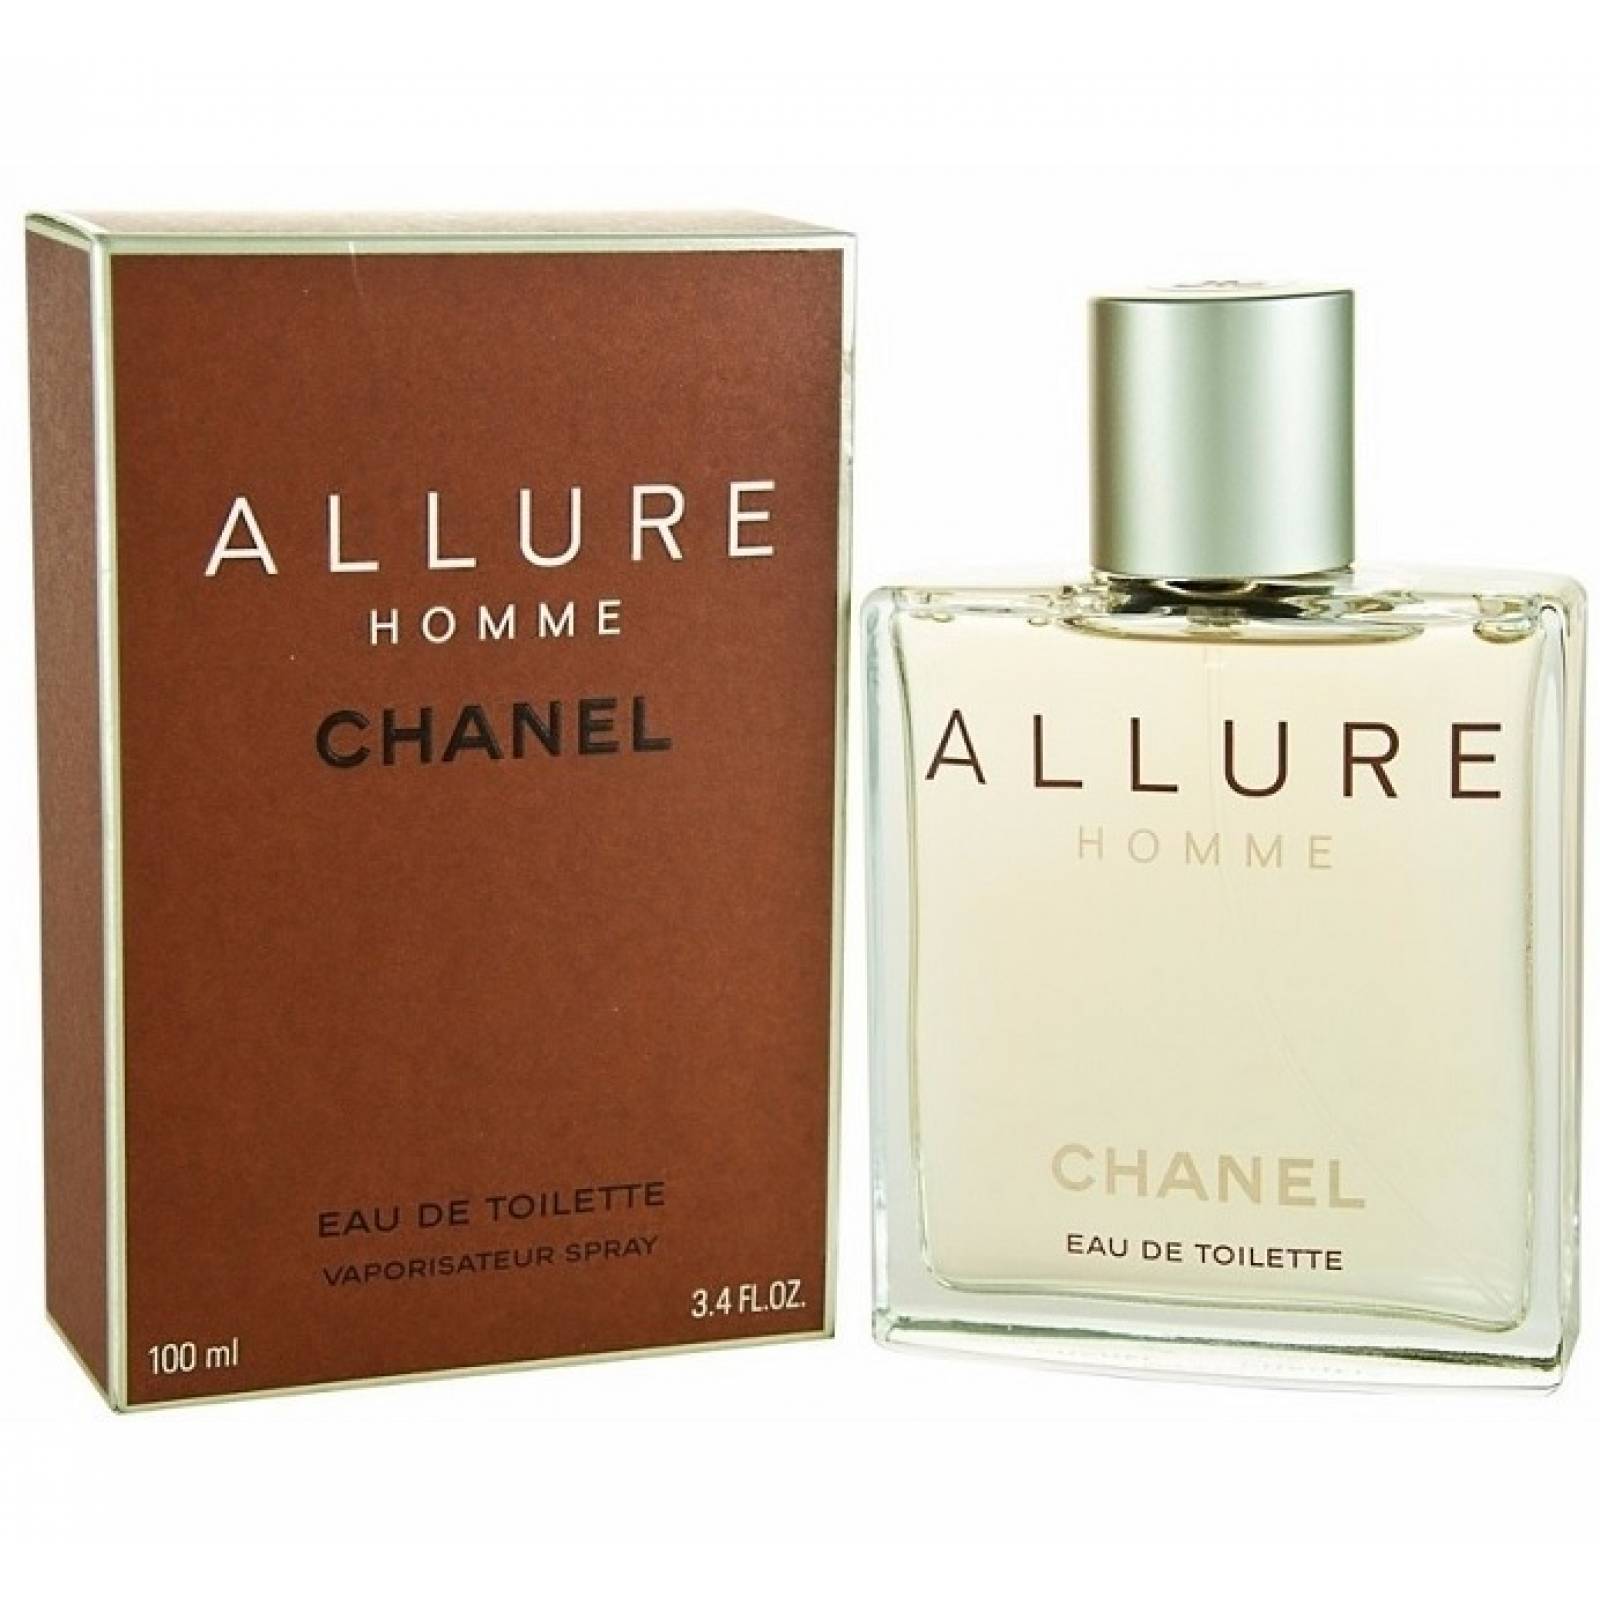 Chanel Allure homme 100 ml